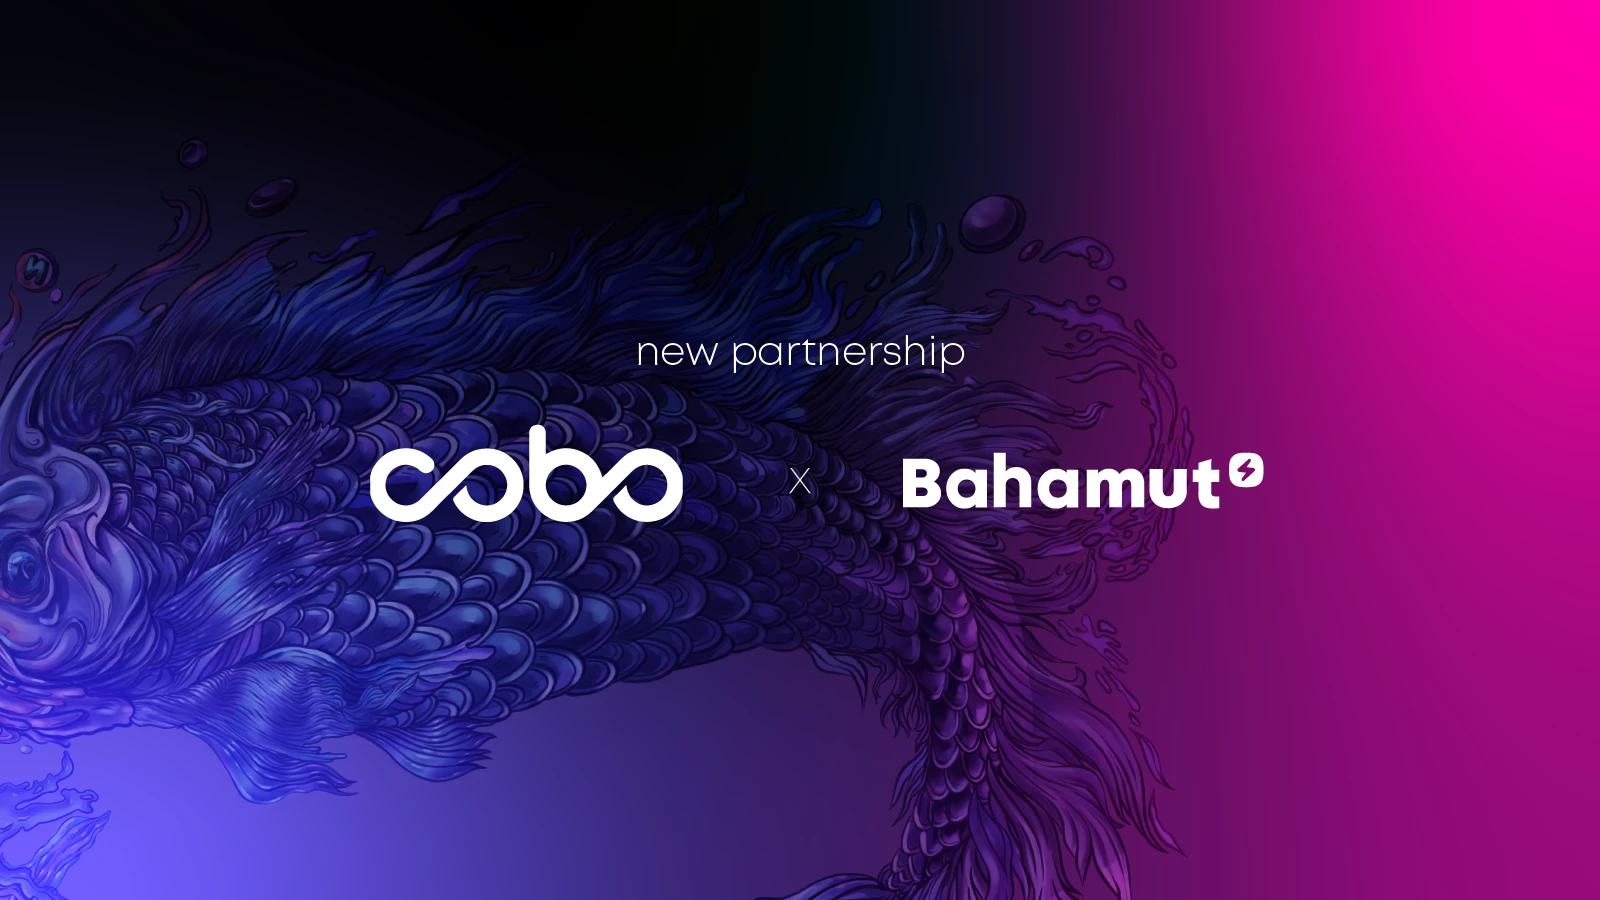 Bahamut blockchain platform partners with Cobo to elevate efficiency and empower chain completion. 